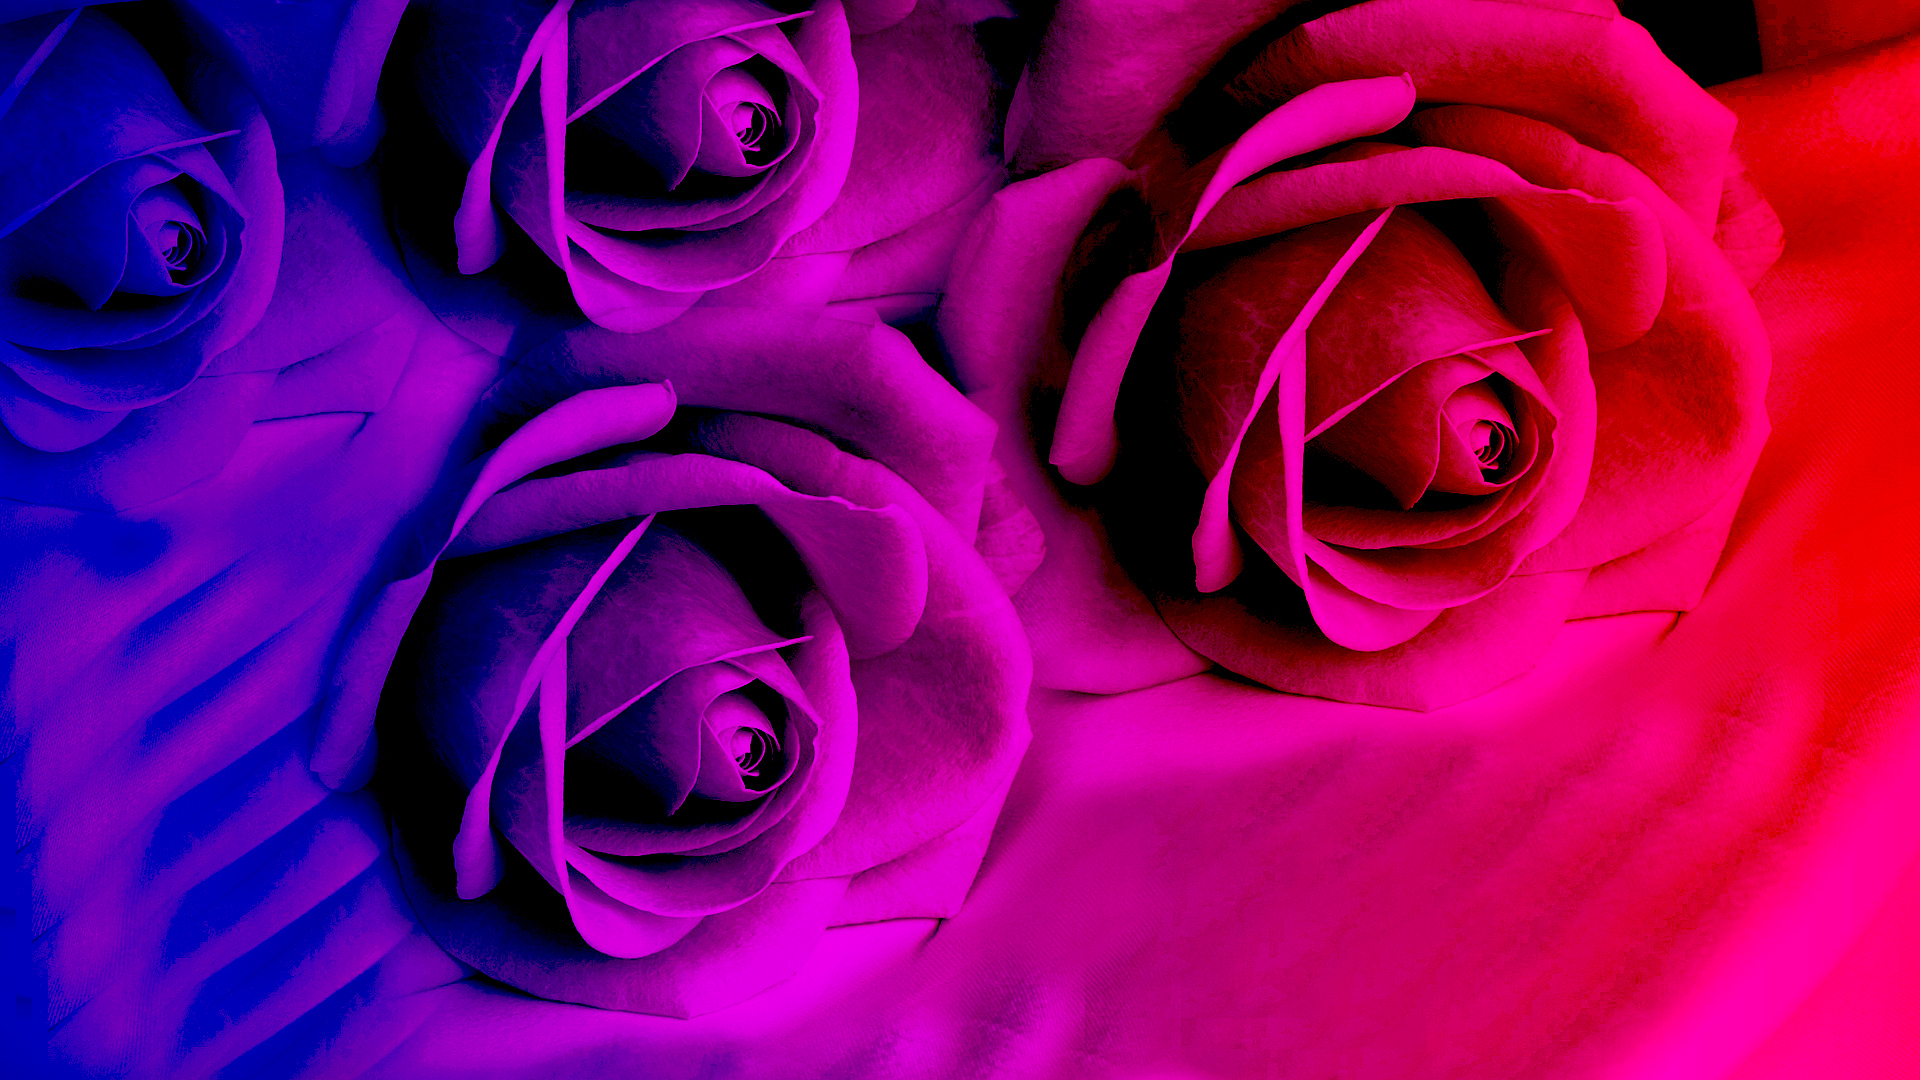 Purple roses in bright color wallpapers and images   wallpapers